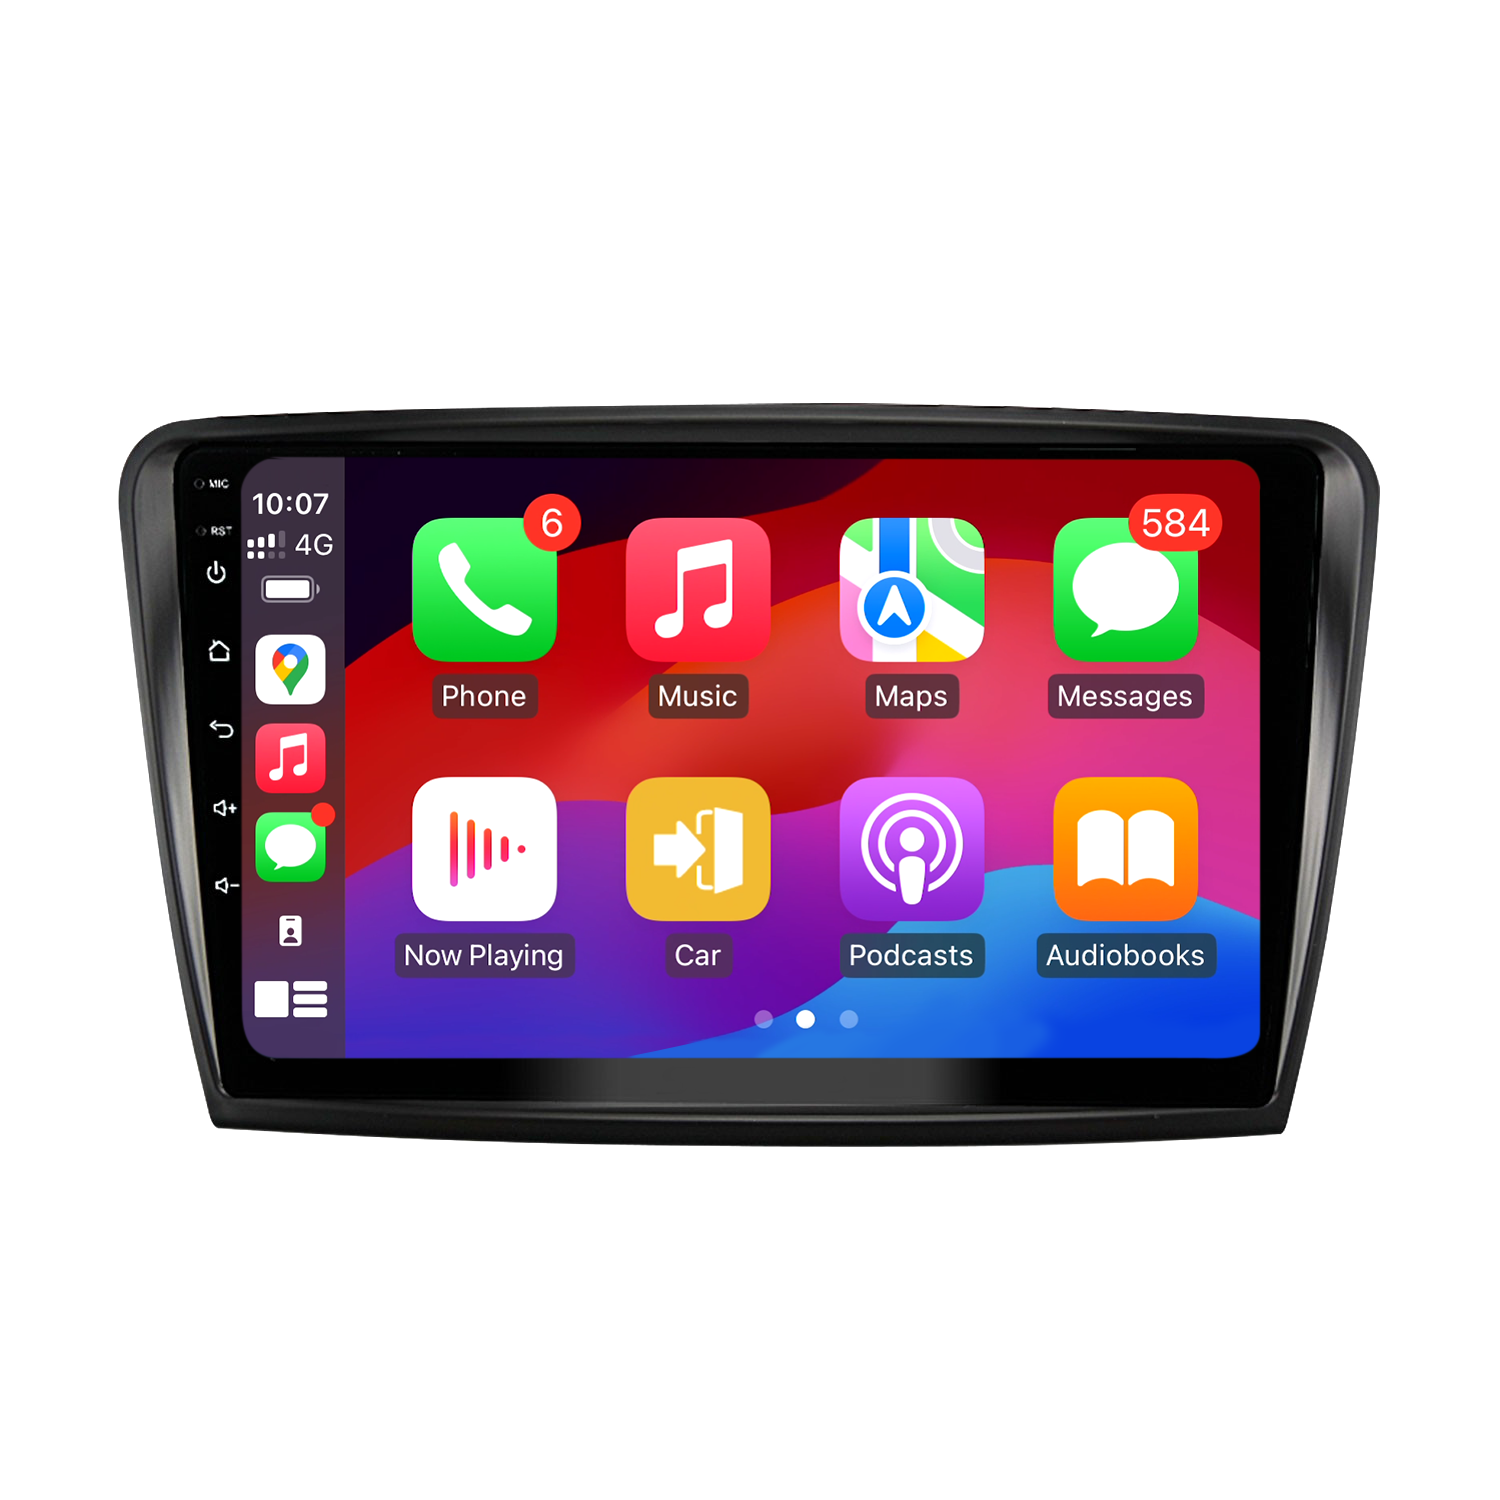 The image shows a car infotainment system displaying the Apple CarPlay interface. The screen features various app icons including Phone, Music, Maps, Messages, Now Playing, Car, Podcasts, and Audiobooks. The status bar at the top indicates the time as 10:07, the presence of a 4G connection, and signal strength. Additionally, there are notifications visible, such as 6 unread messages and 584 unread messages in the Messages app. The screen is surrounded by head unit.